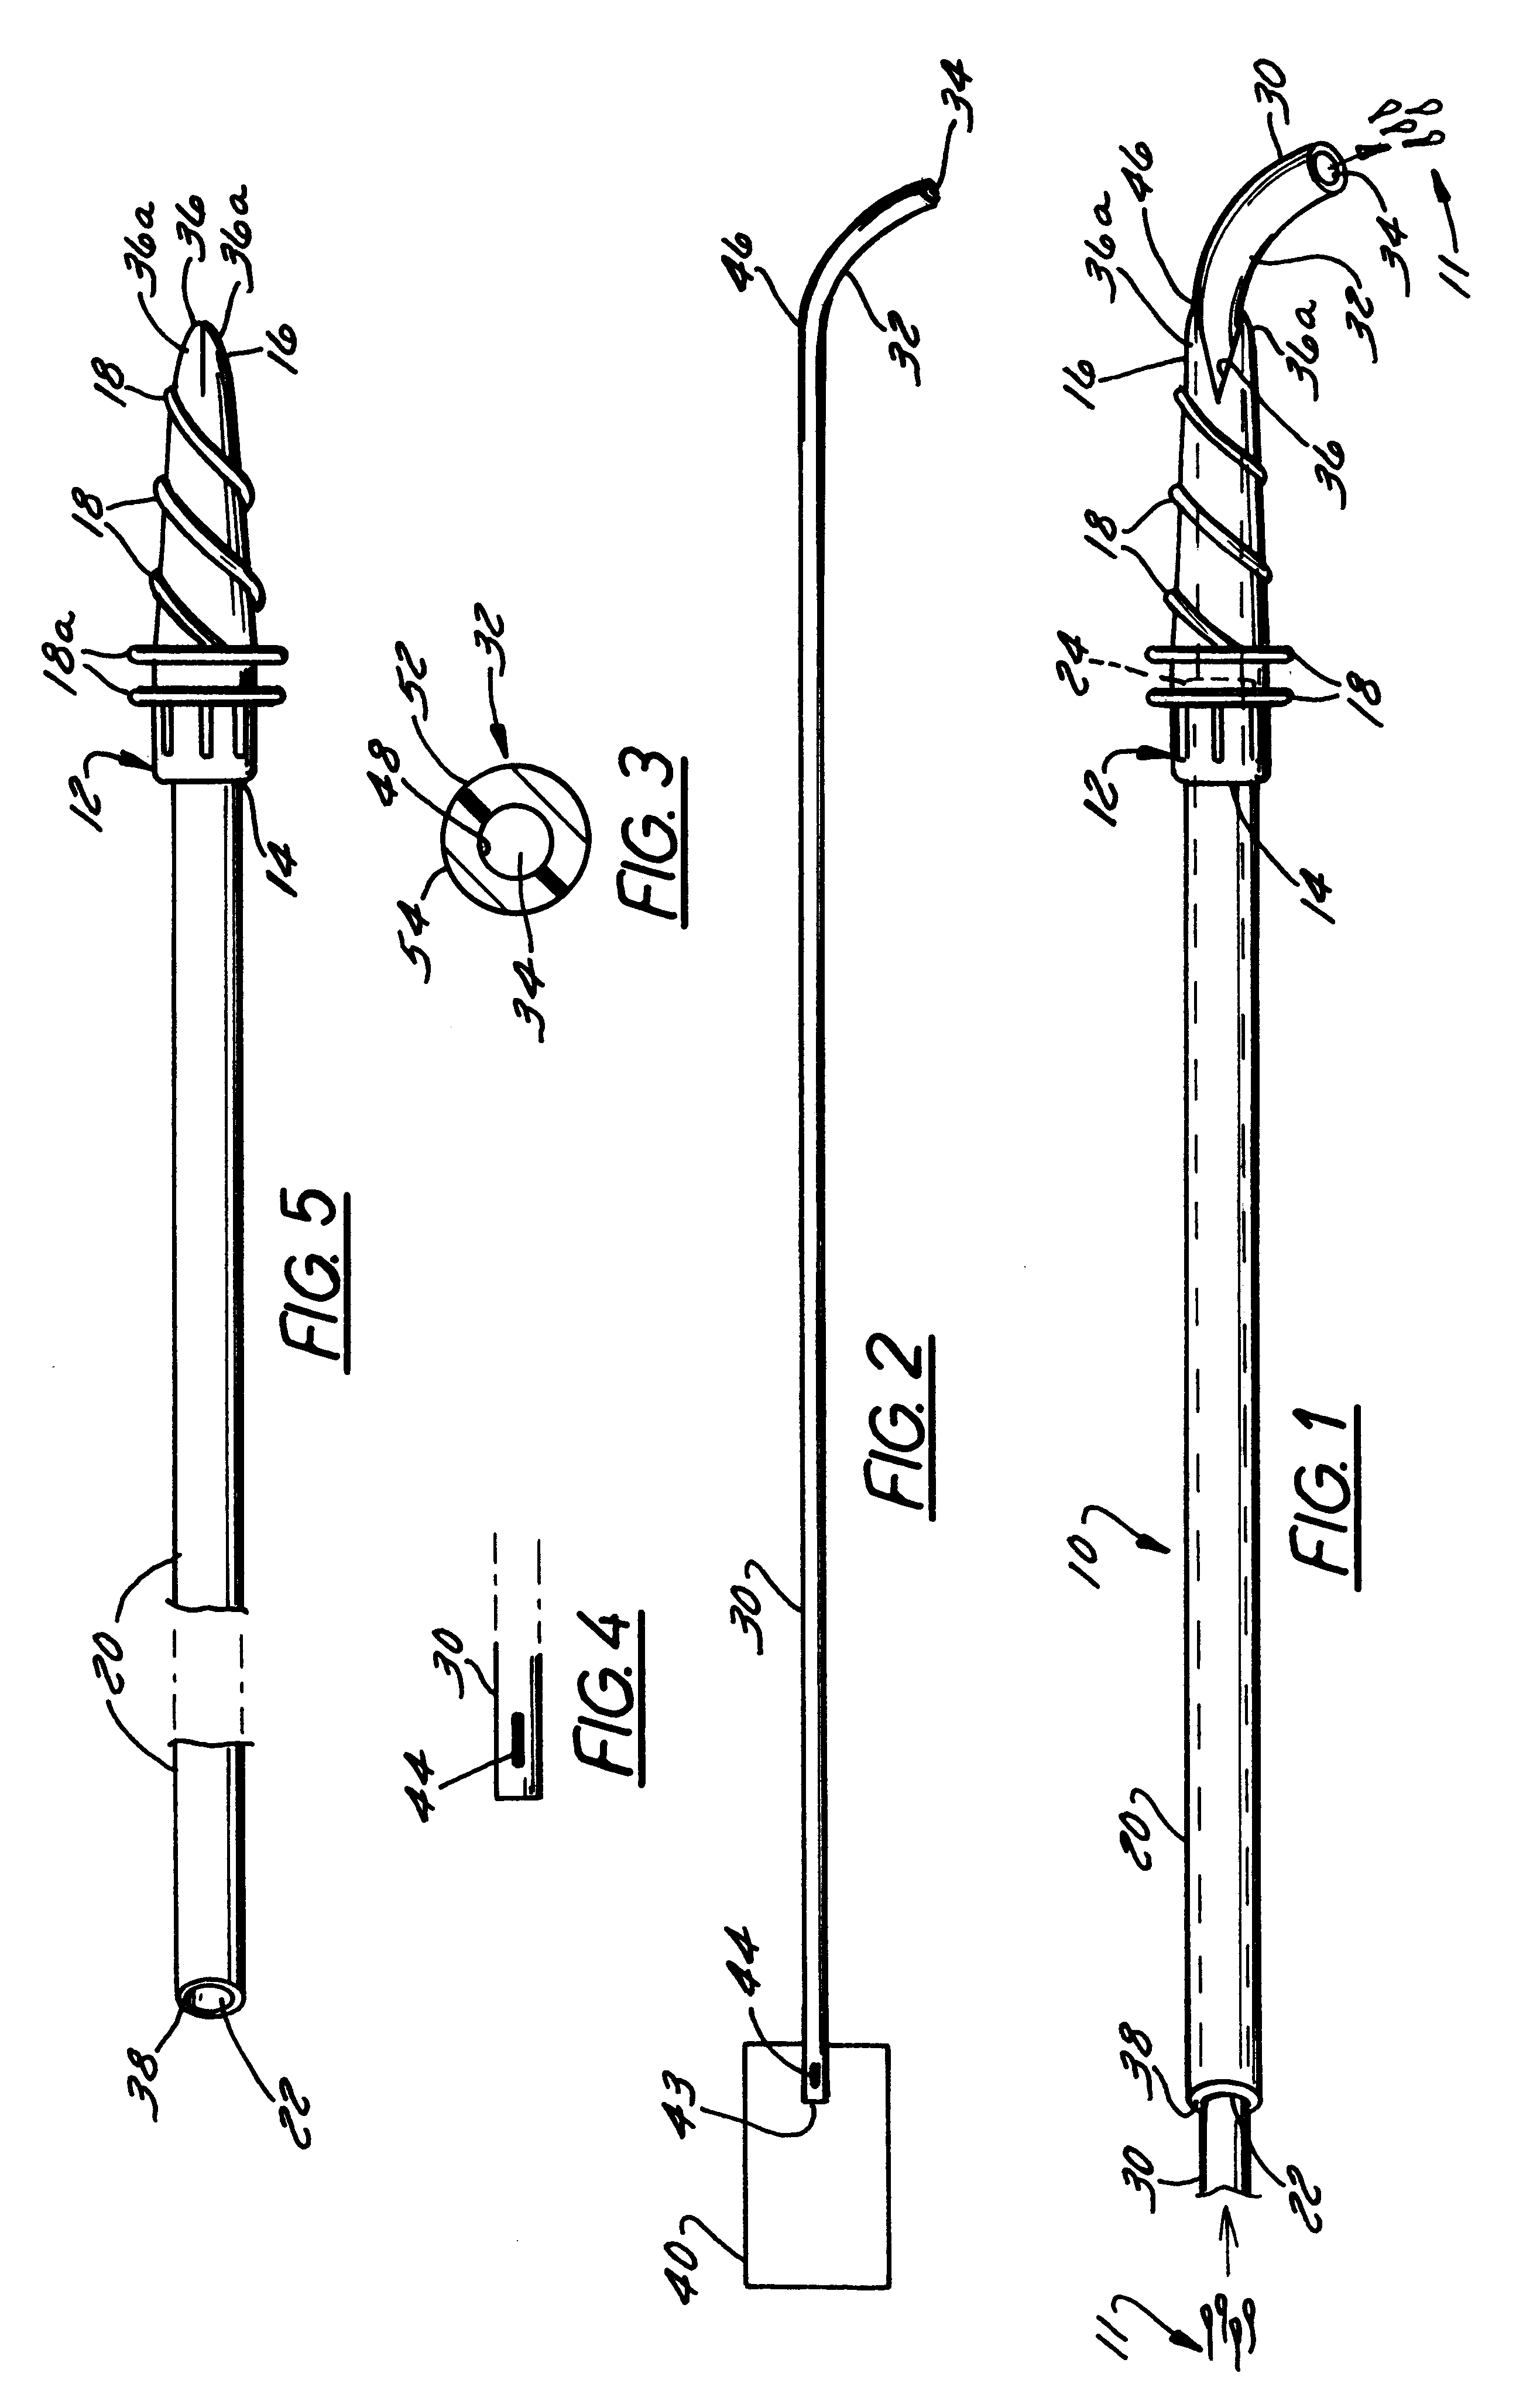 Device for trans-cervical artificial insemination and embryo transfer